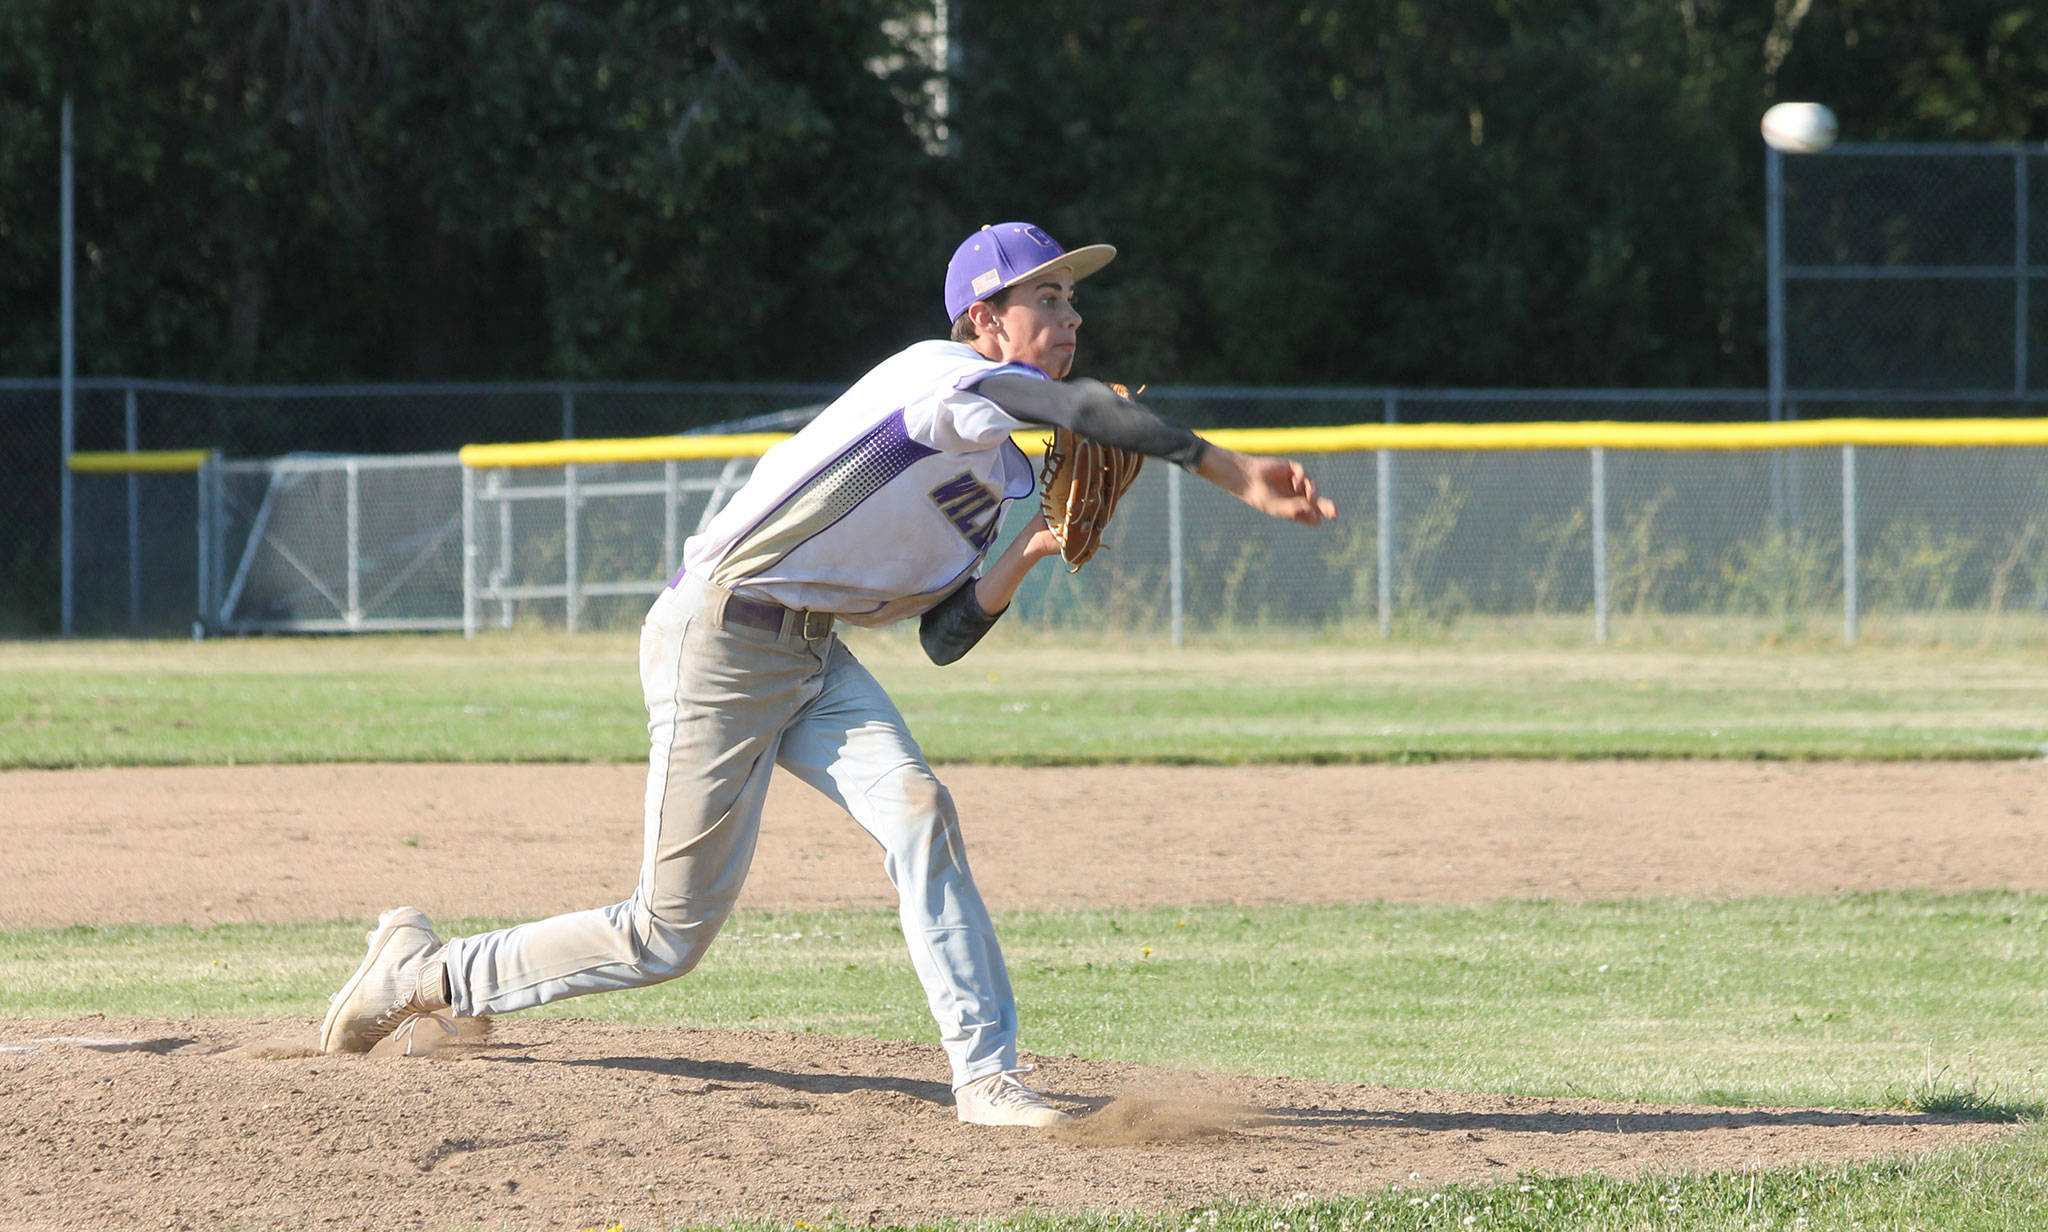 Gage McLeod fires a pitch in the Babe Ruth team’s final game last month. (Photo by Jim Waller/Whidbey News-Times)